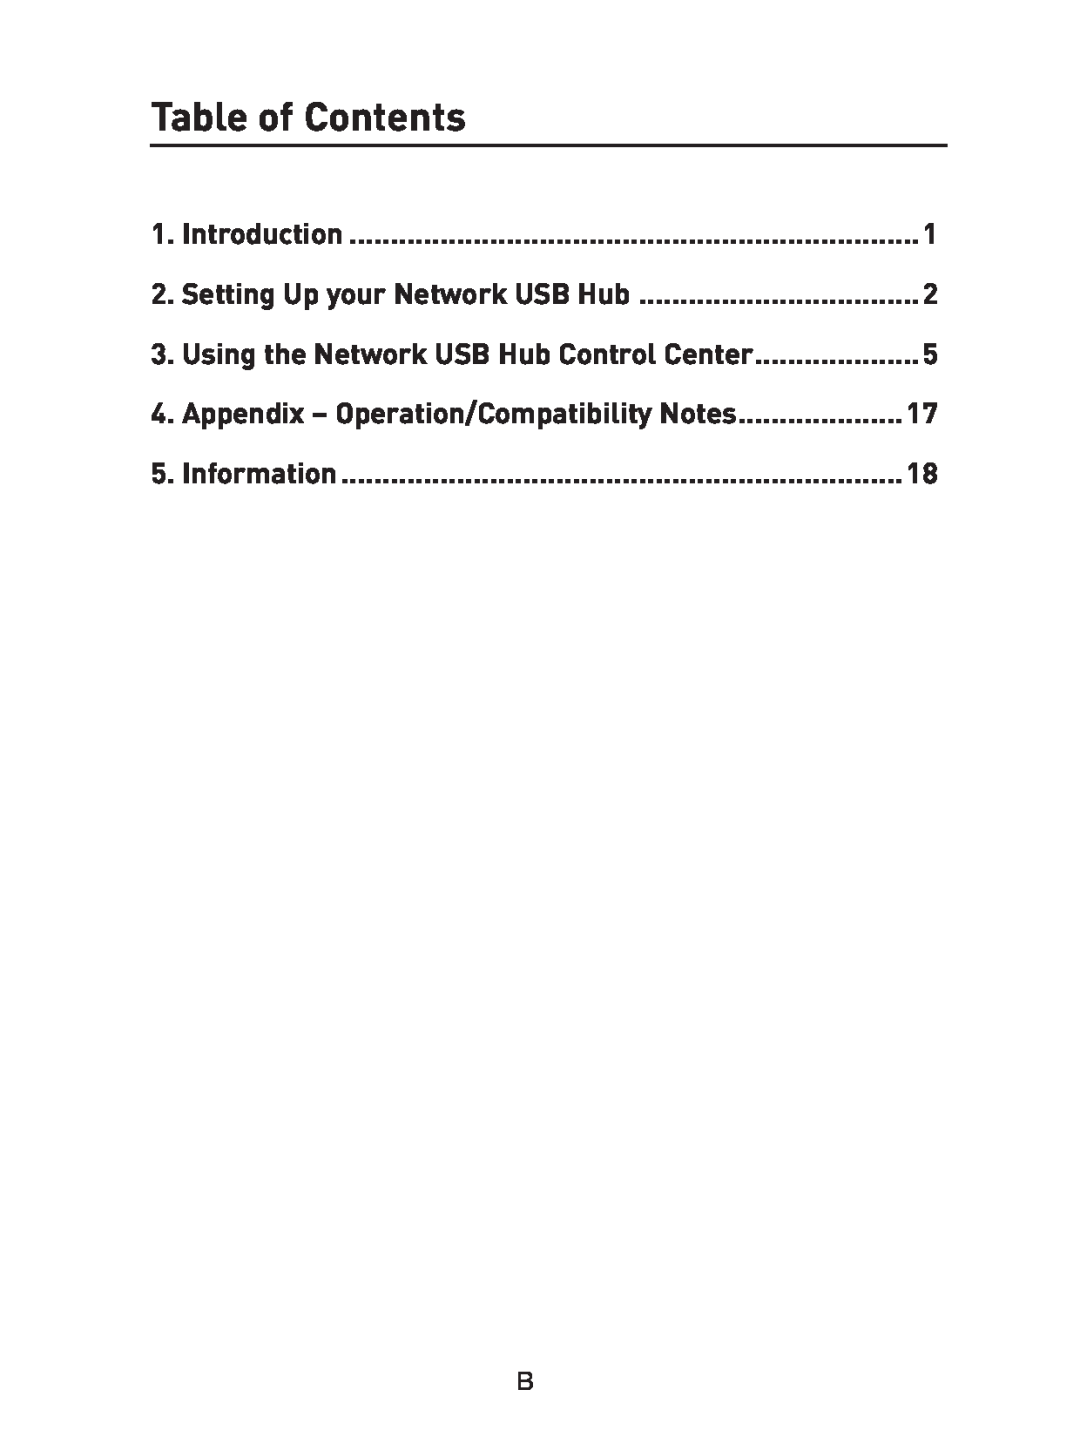 Belkin F5L009 user manual Table of Contents, Appendix - Operation/Compatibility Notes, Information, Introduction 